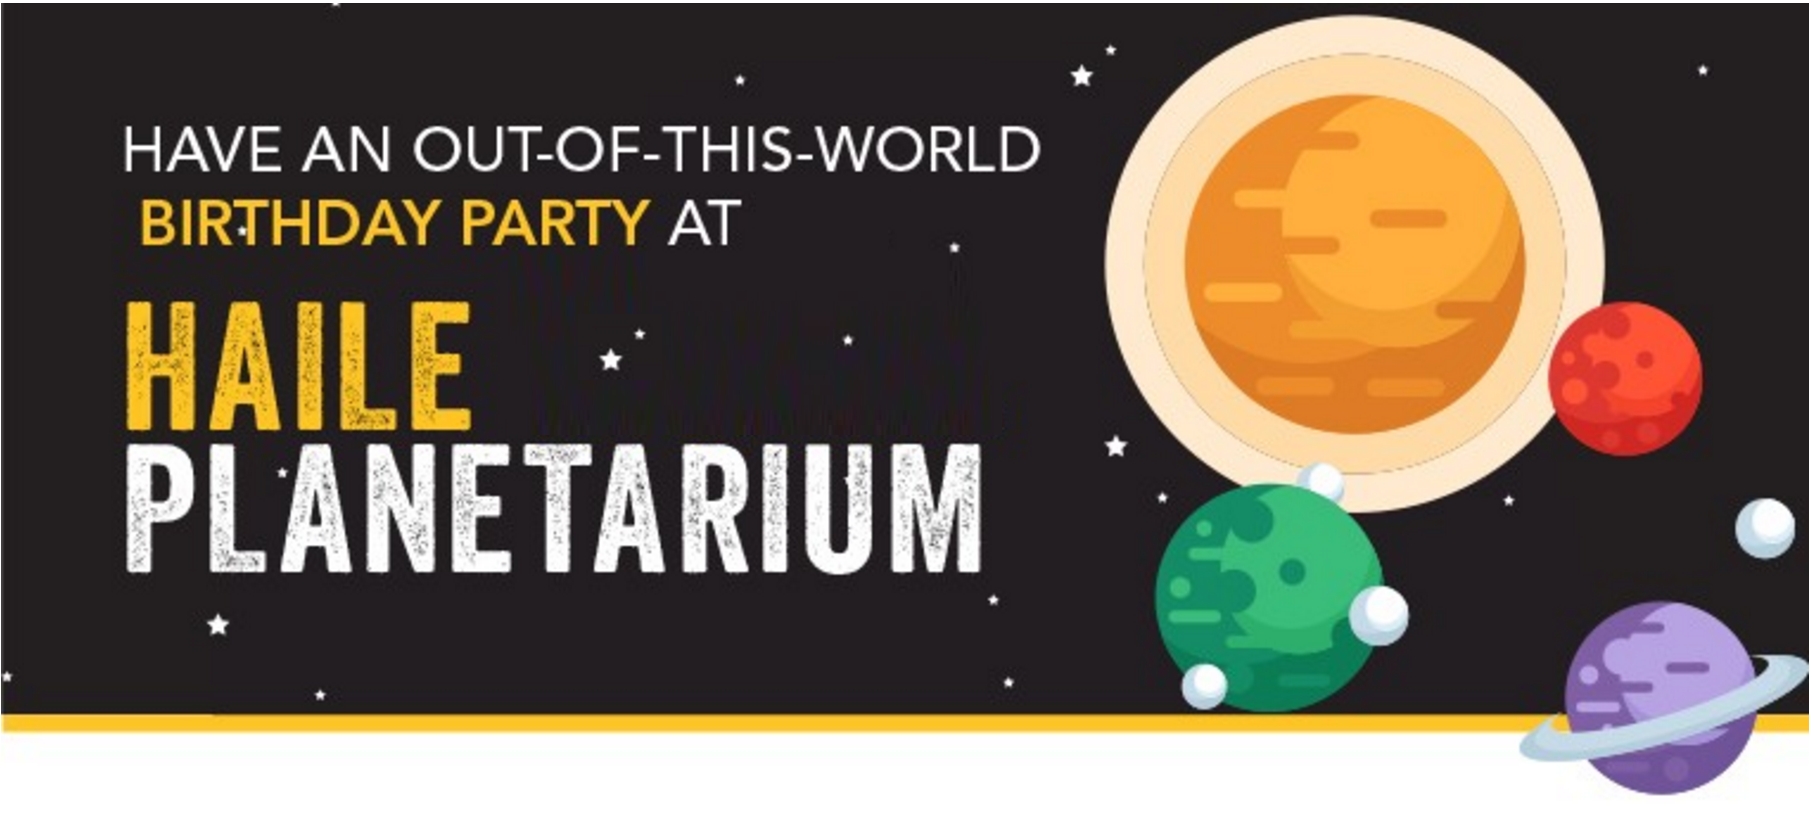  Have an out-of-this-world birthday party at Haile Planetarium